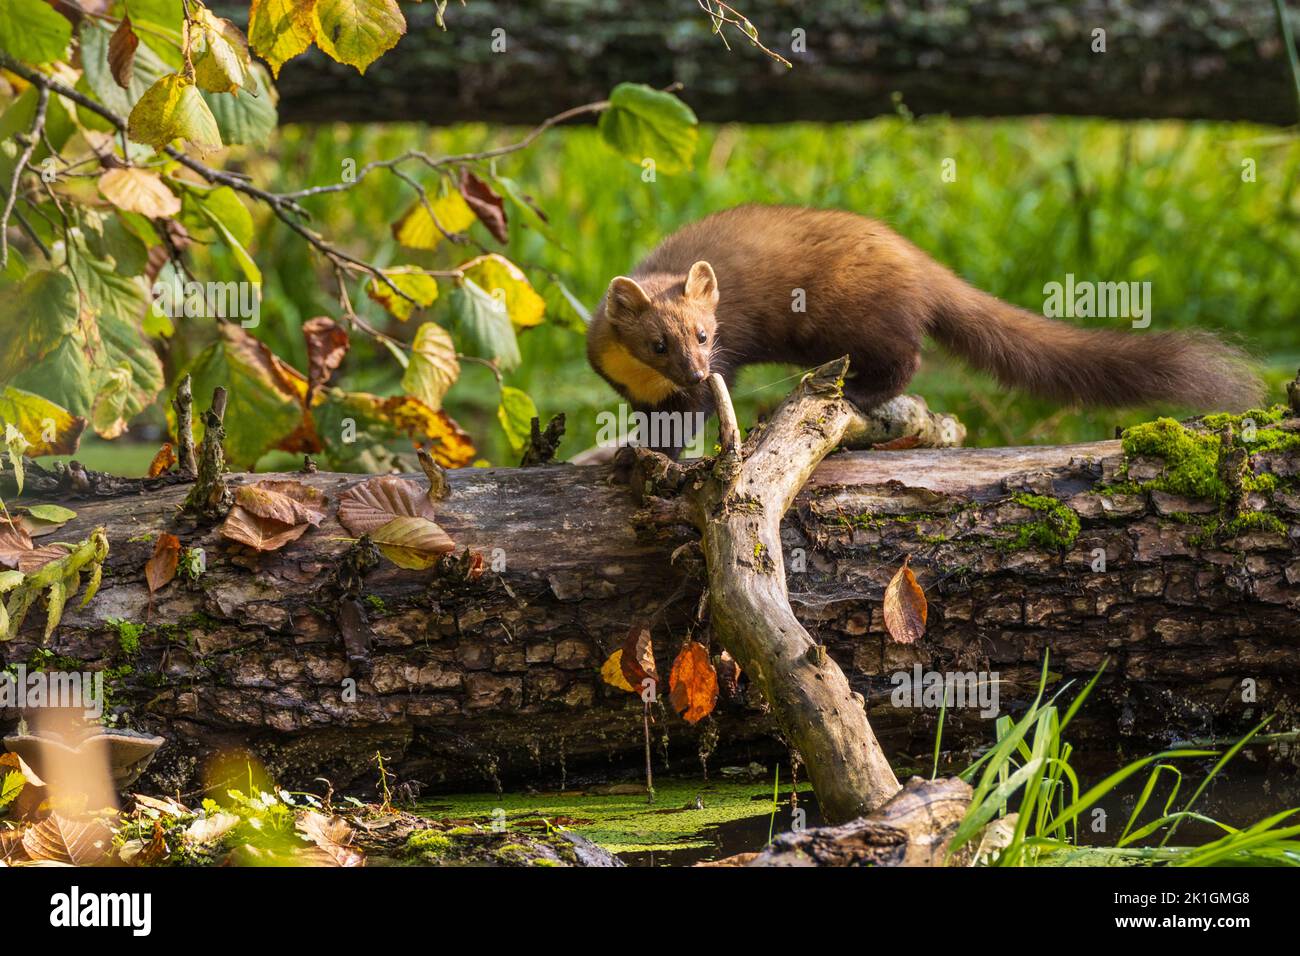 Pine Marten (Martes martes) close to water with lying tree in background, Bialowieza Forest, Poland, Europe Stock Photo